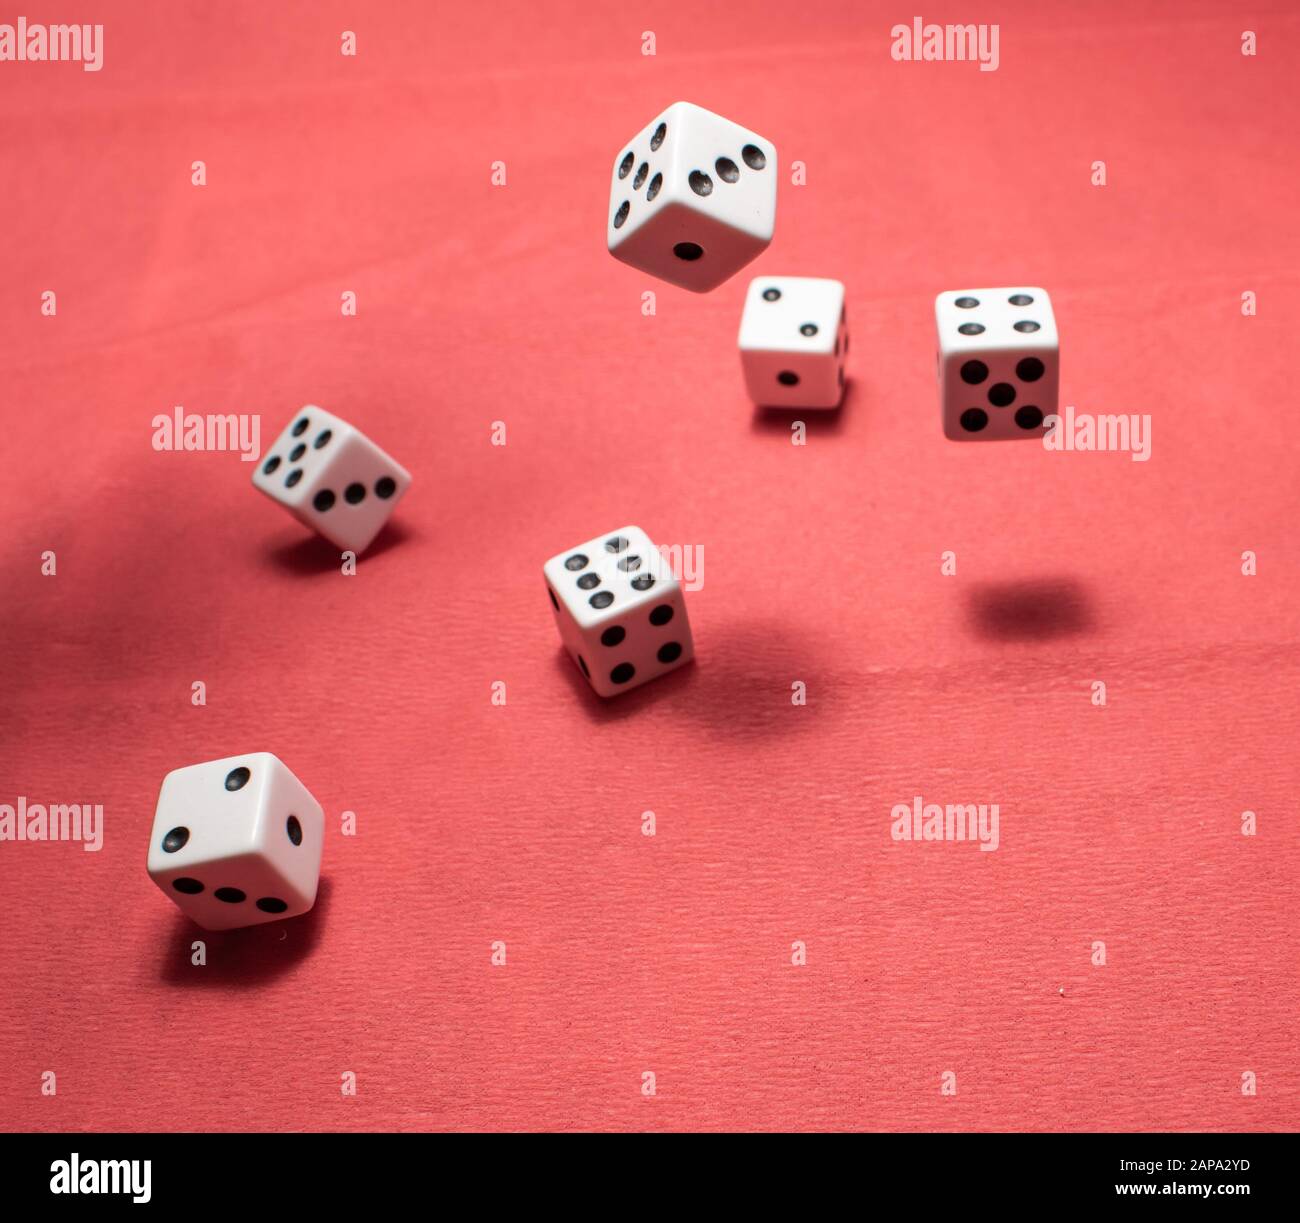 Hand Throwing And Rolling Dice Gambler Tossing Five Red Poker And Casino  Dice On Table Man Gambling Or Playing Board Game Stock Photo - Download  Image Now - iStock